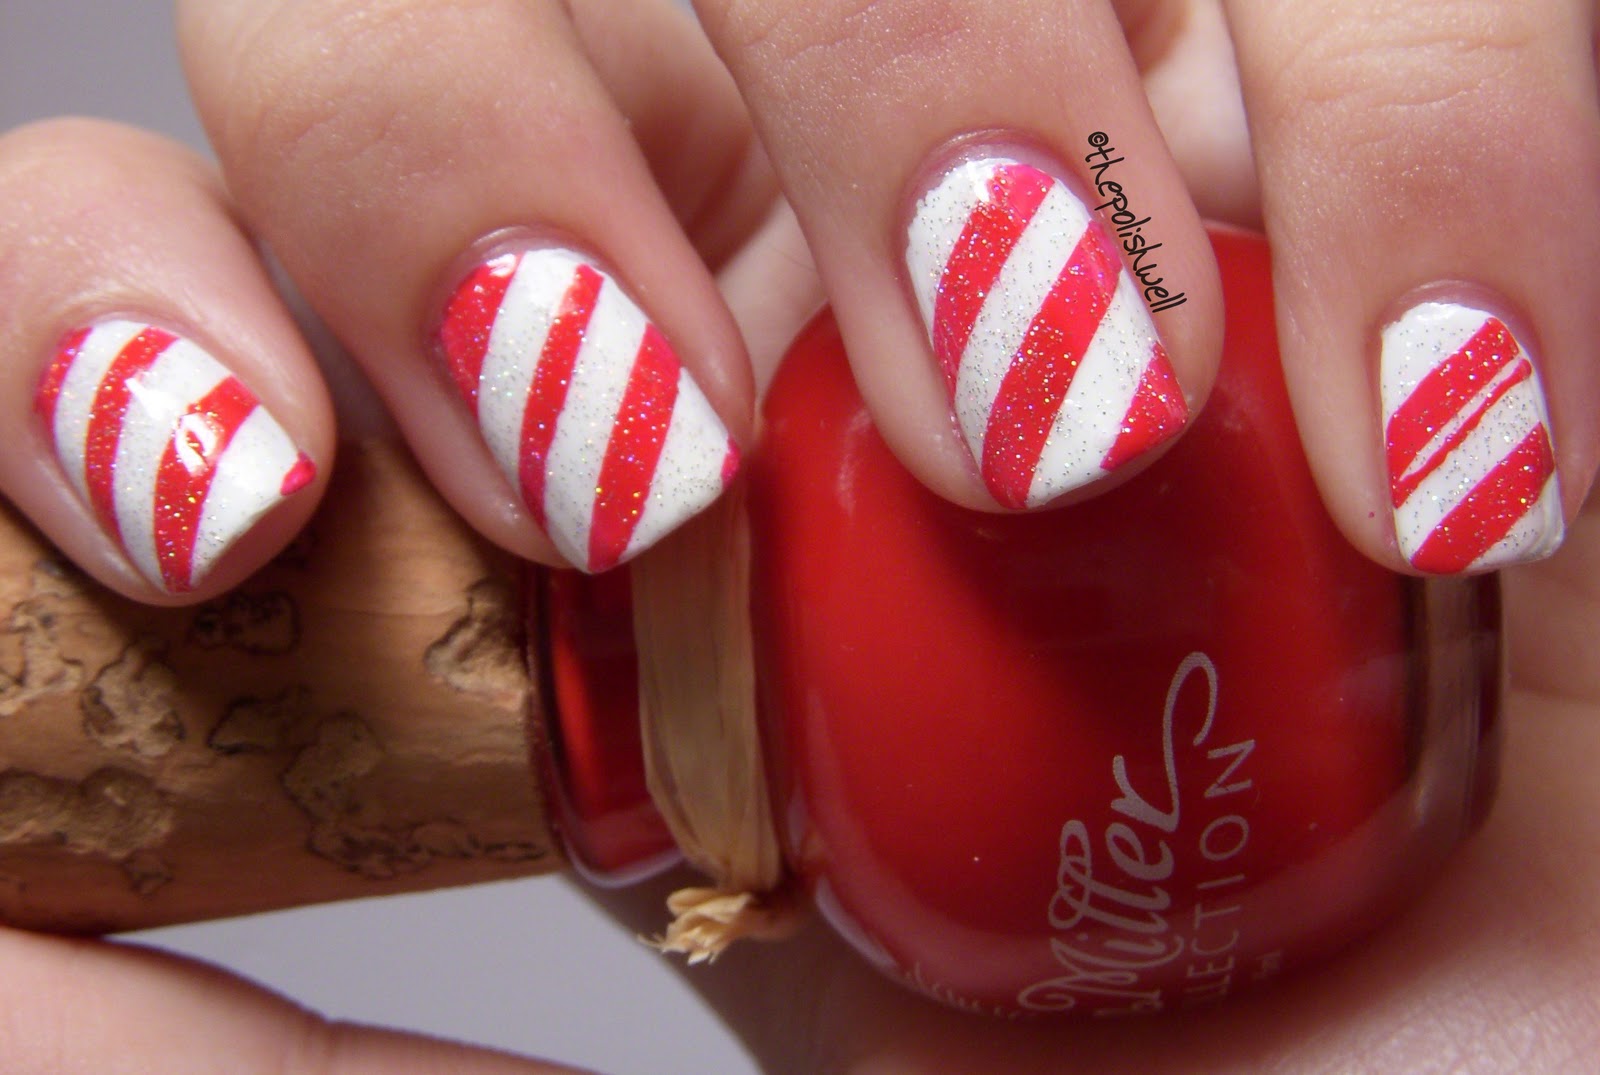 10. Candy Cane Coffin Nails - wide 6